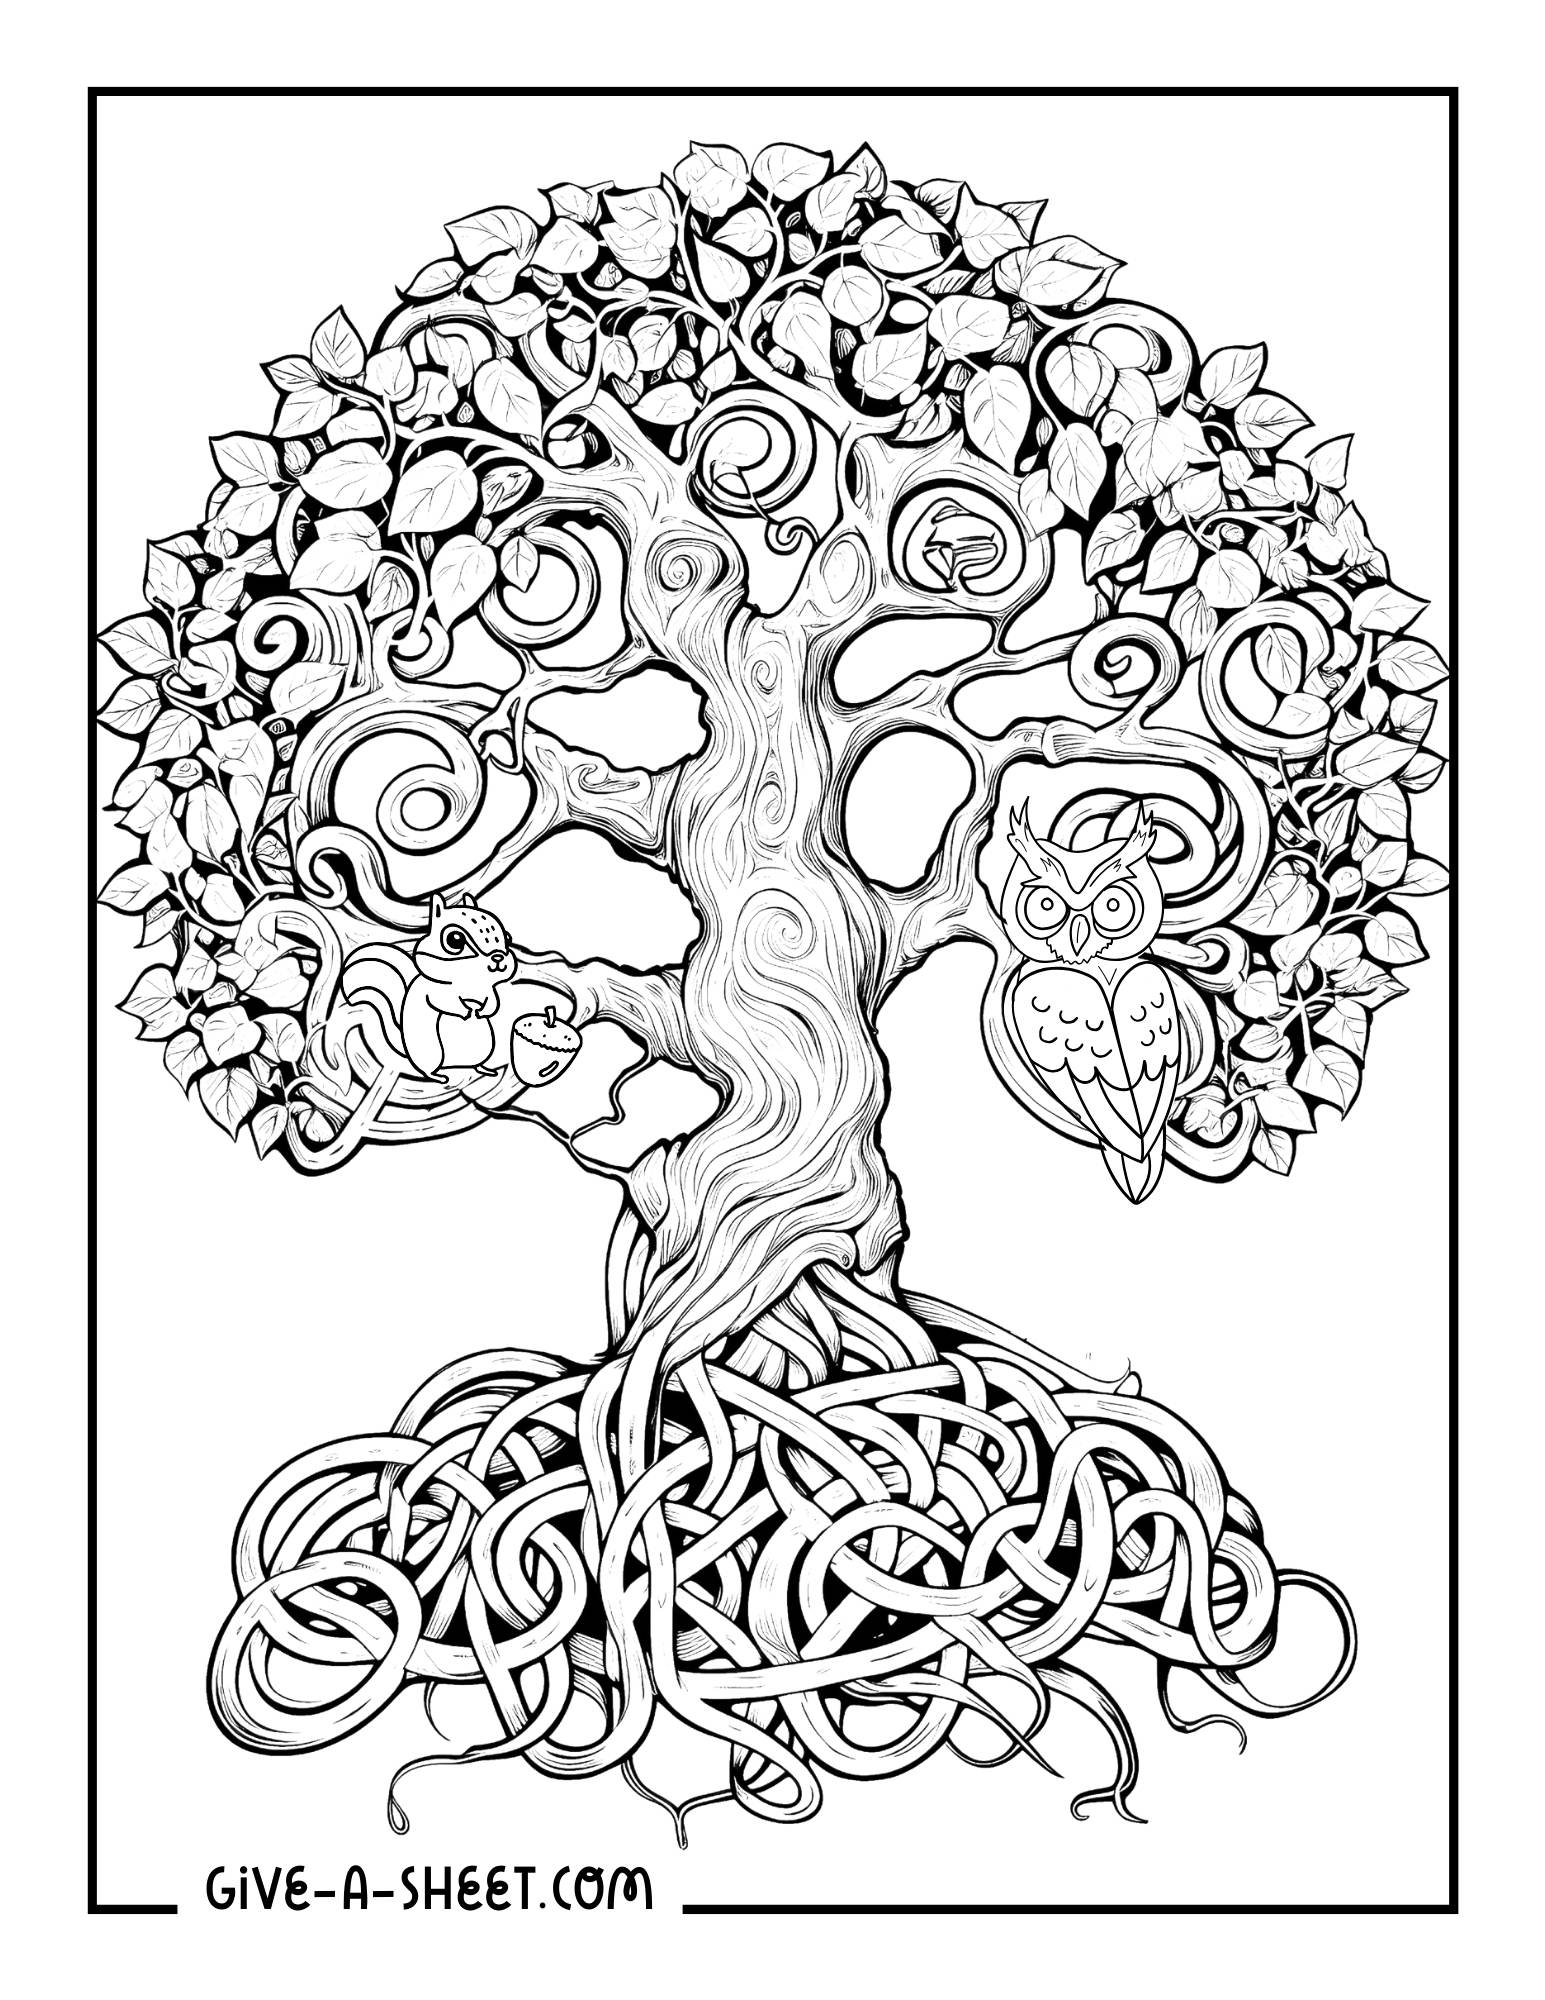 Zentangle tree coloring page for adults.